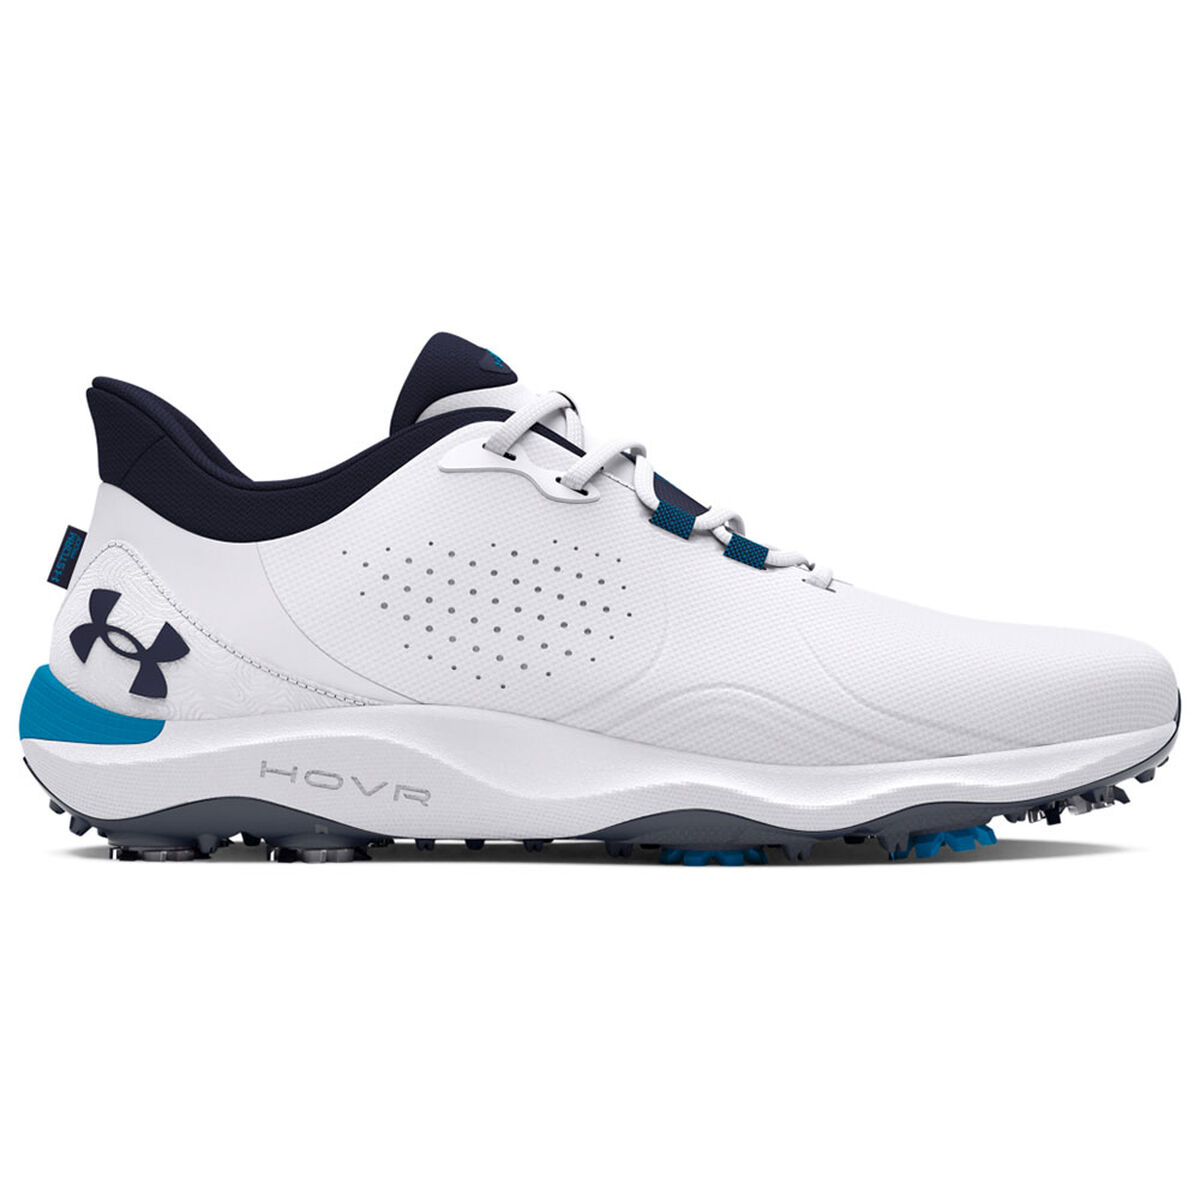 Under Armour Men’s Drive Pro Waterproof Spiked Golf Shoes, Mens, White/capri/midnight navy, 10 | American Golf